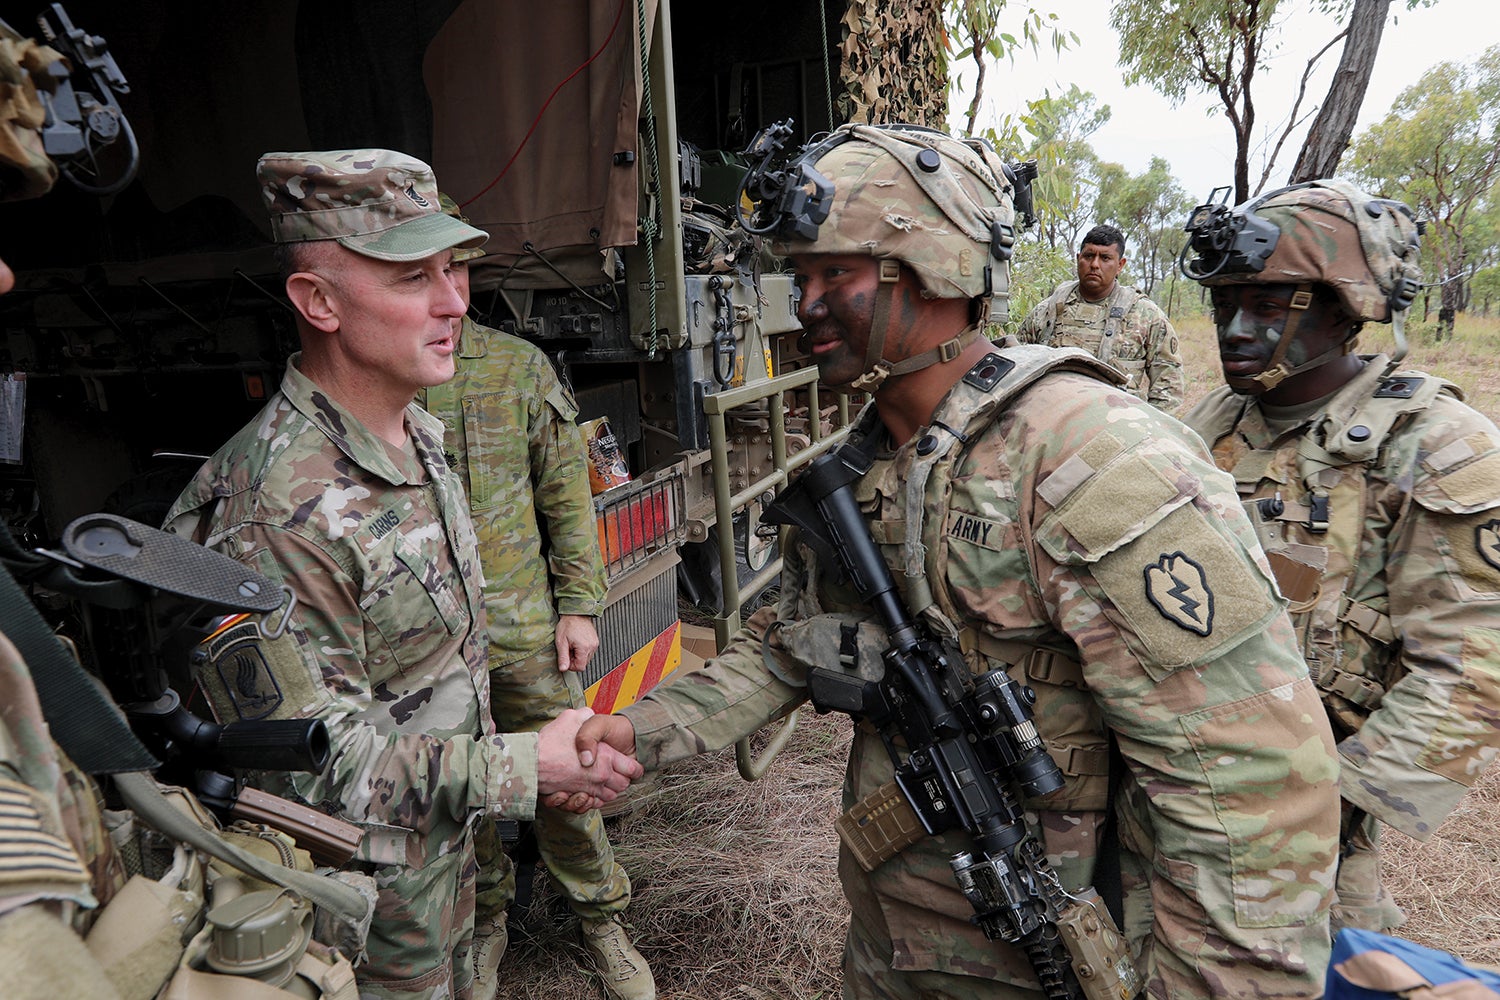 I Corps Command Sgt. Maj. Shawn Carns, left, visits 25th Infantry Division soldiers in Queensland, Australia, during exercise Talisman Sabre 23. (Credit: U.S. Army/Sgt. 1st Class John Healy)